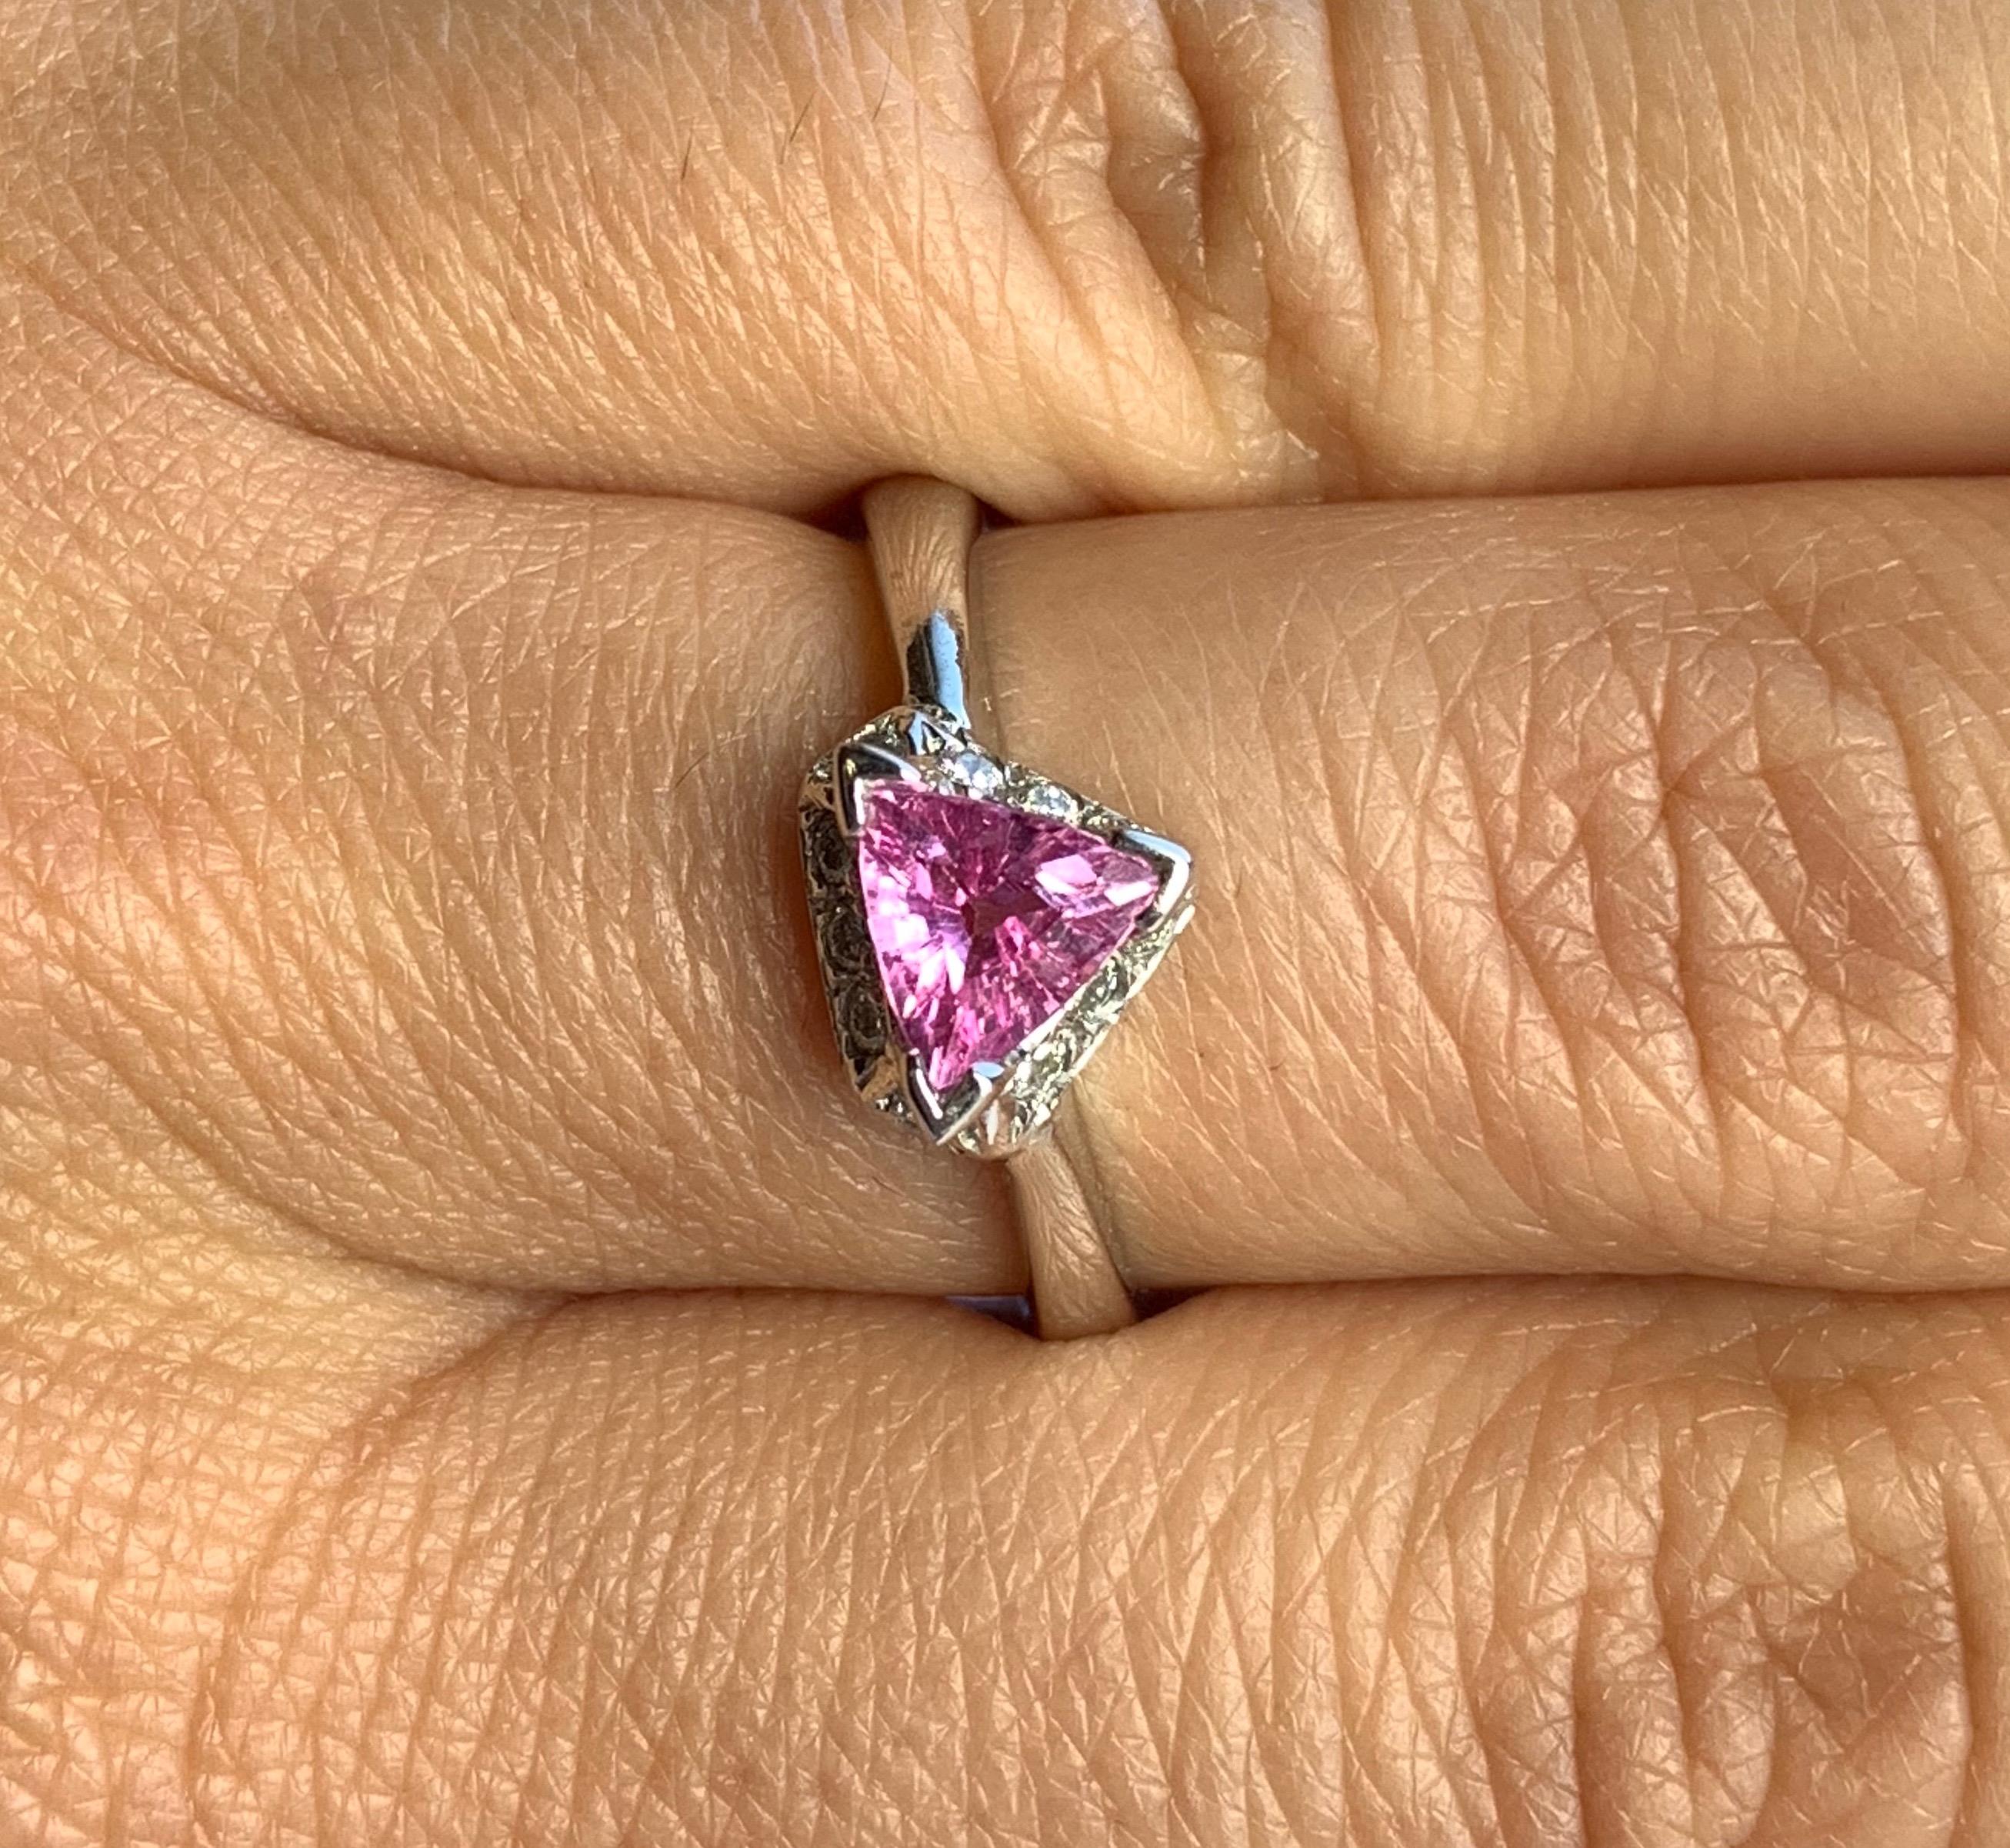 Material: 14k White Gold 
Center Stone Details: 0.72 Carat Trillion Cut Pink Sapphire 
Mounting Diamond Details: 11 Round White Diamonds Approximately 0.15 Carats - Clarity: SI / Color: H-I
Ring Size: 6.25. Alberto offers complimentary sizing on all